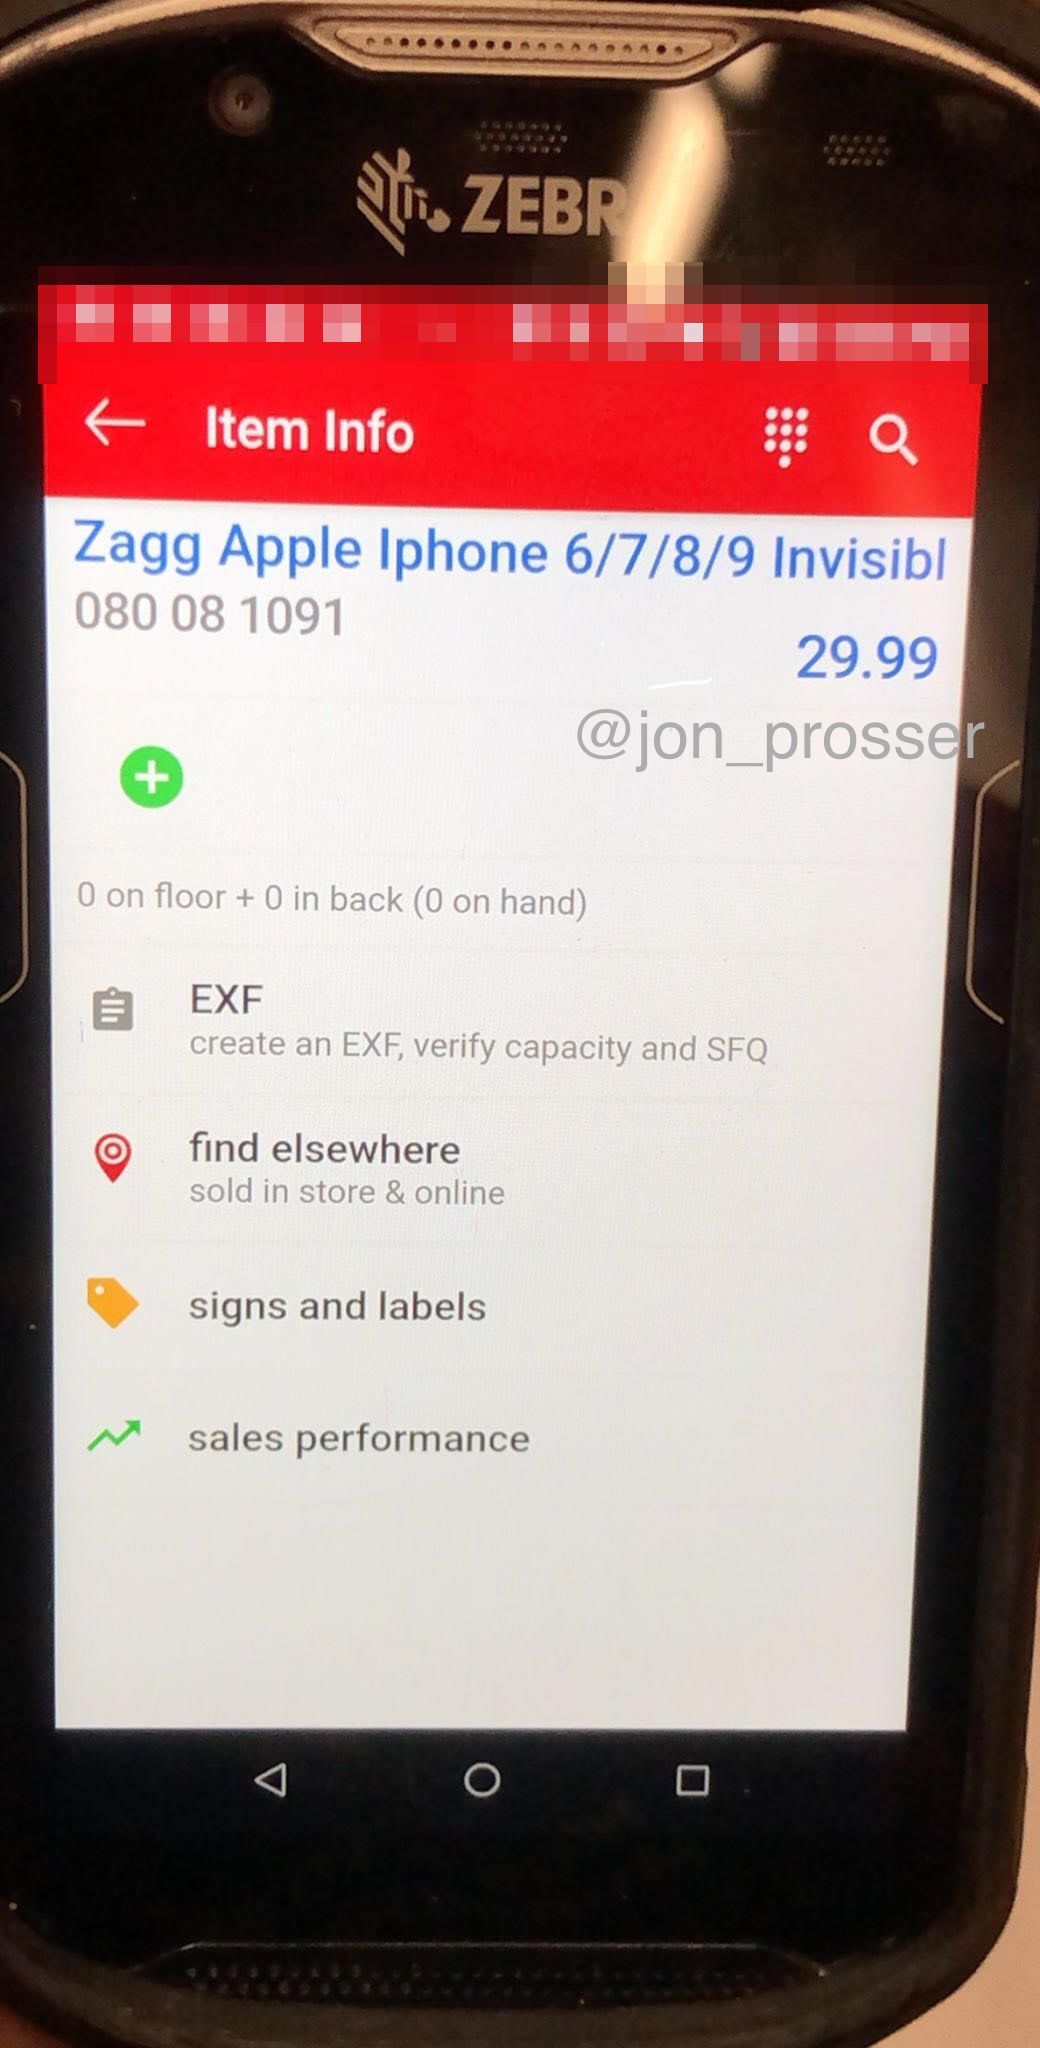 Leak from an anonymous Target employee reveals that the iPhone SE sequel will have a 4.7-inch display - Photo reveals Apple iPhone 9 name, 4.7-inch screen; sorry, no 5G for the SE sequel